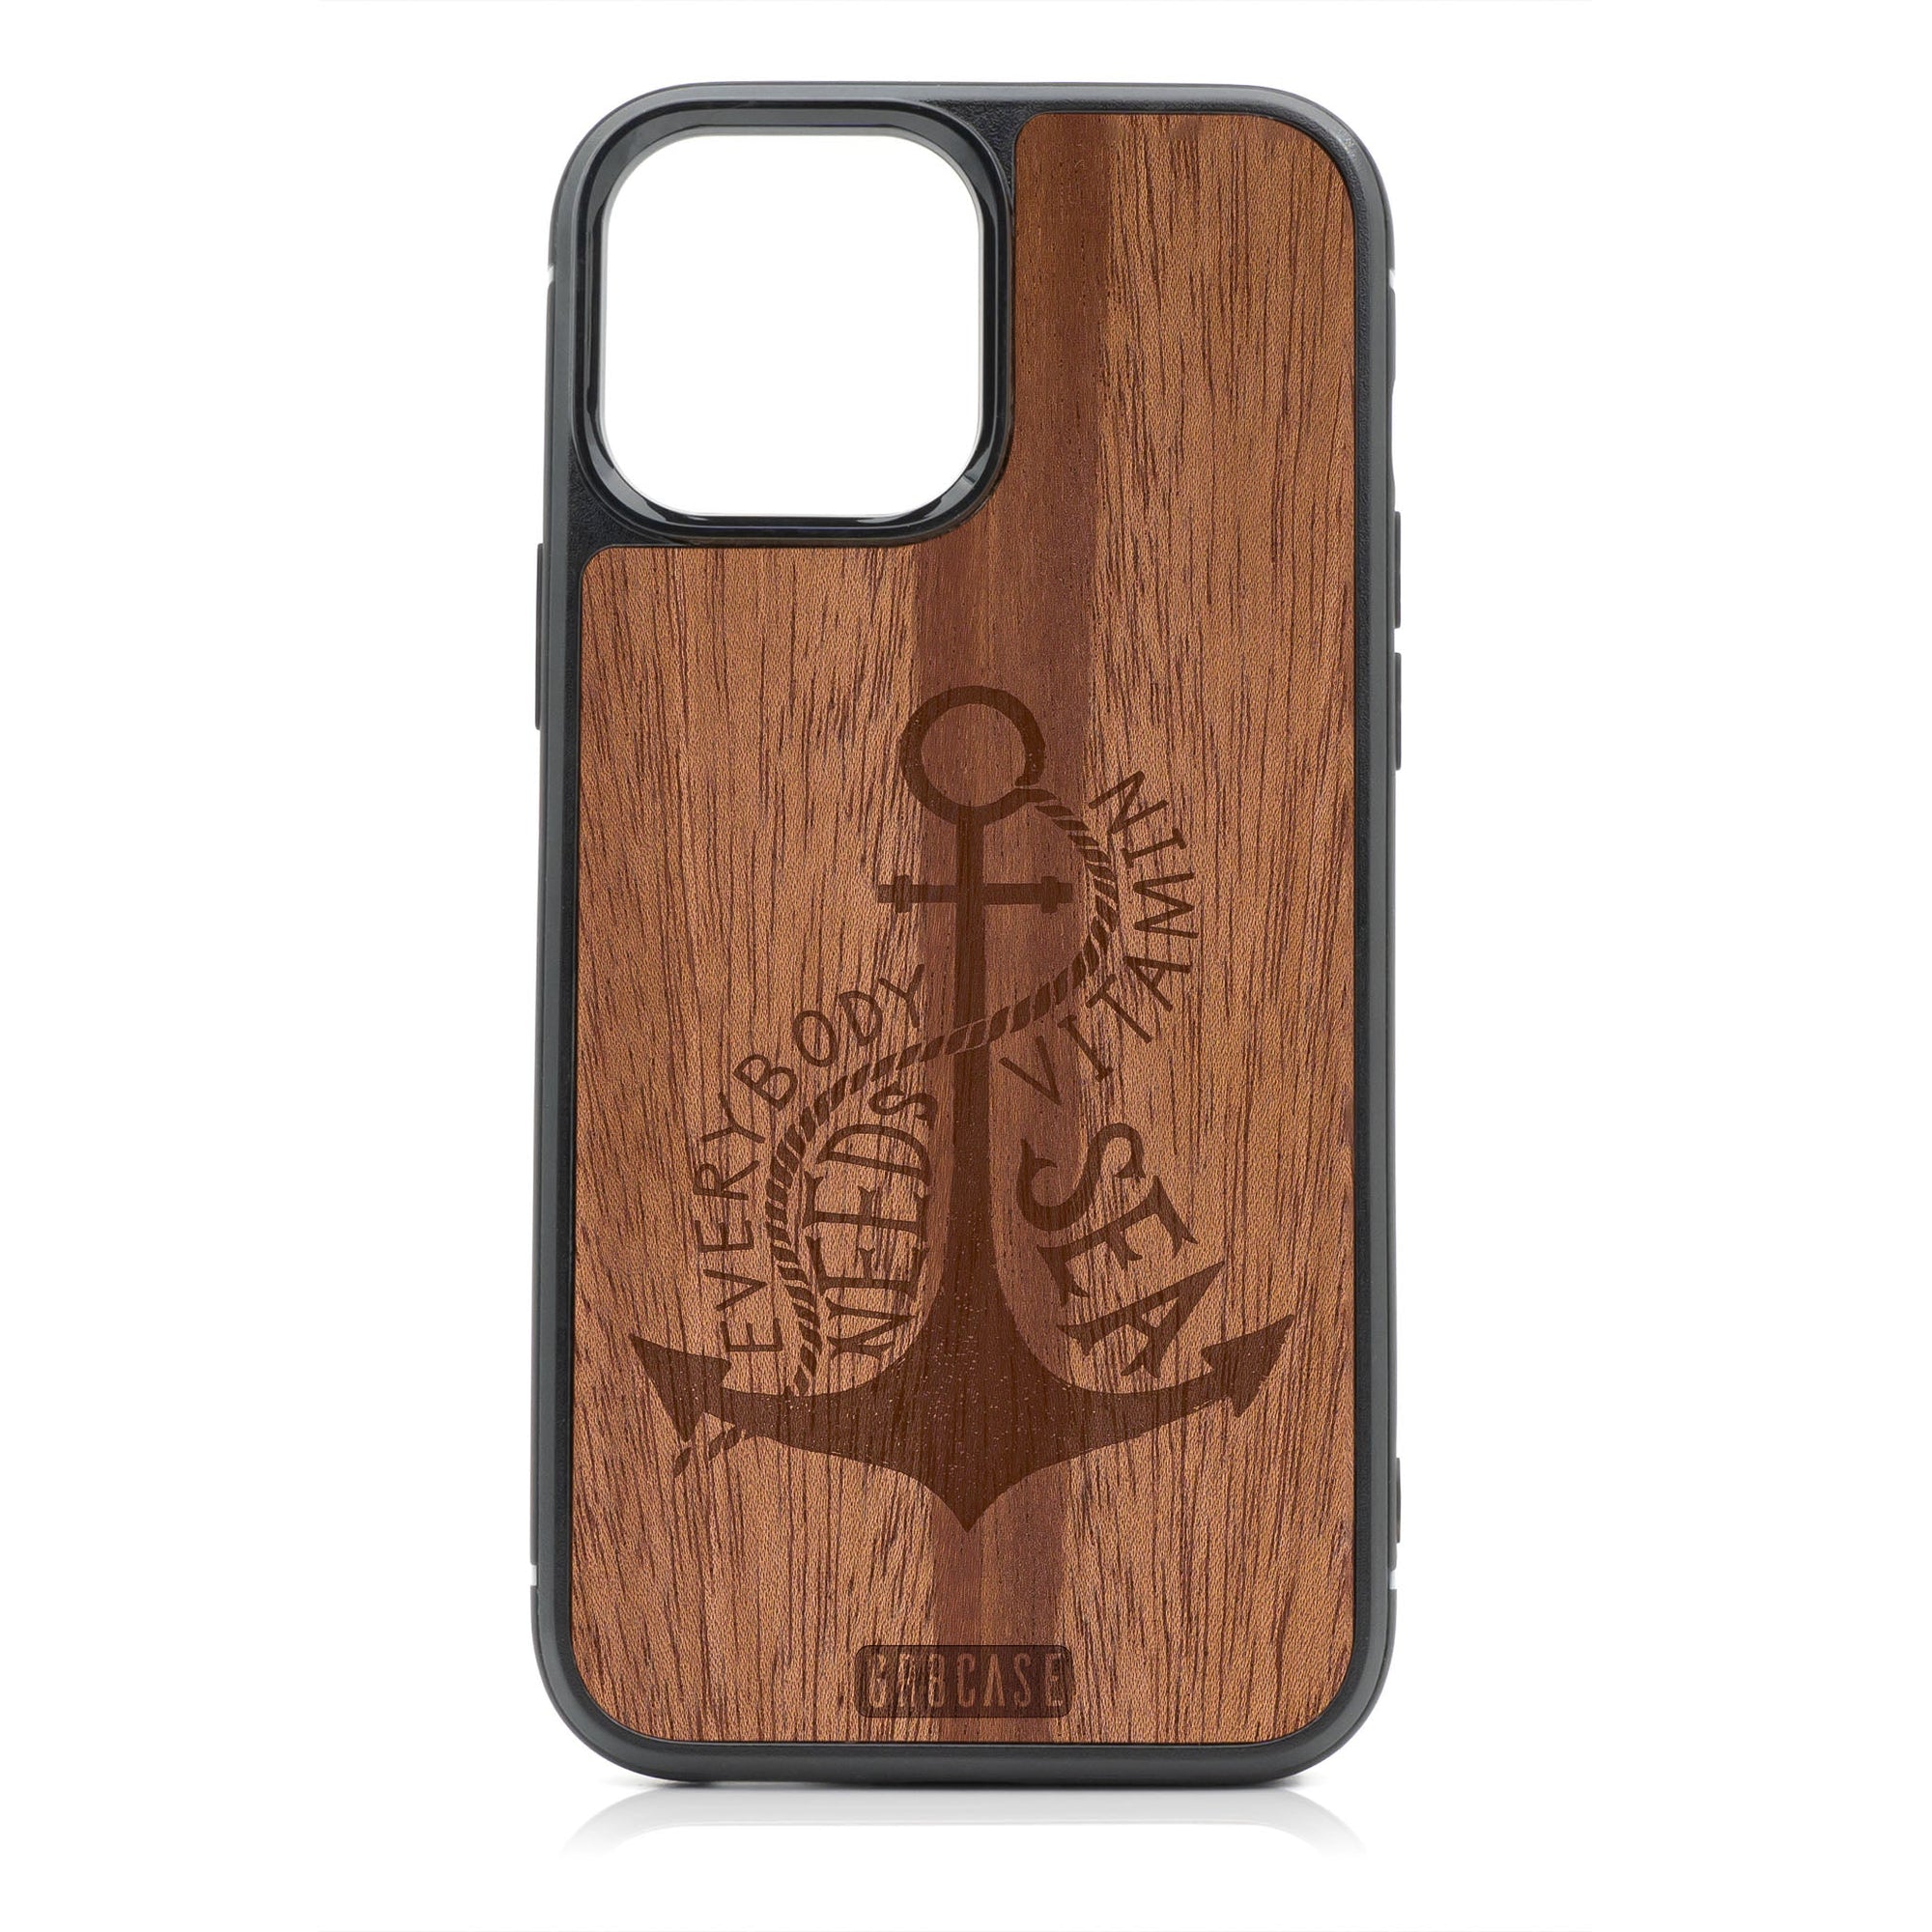 Everybody Needs Vitamin Sea (Anchor) Design Wood Case For iPhone 14 Pro Max